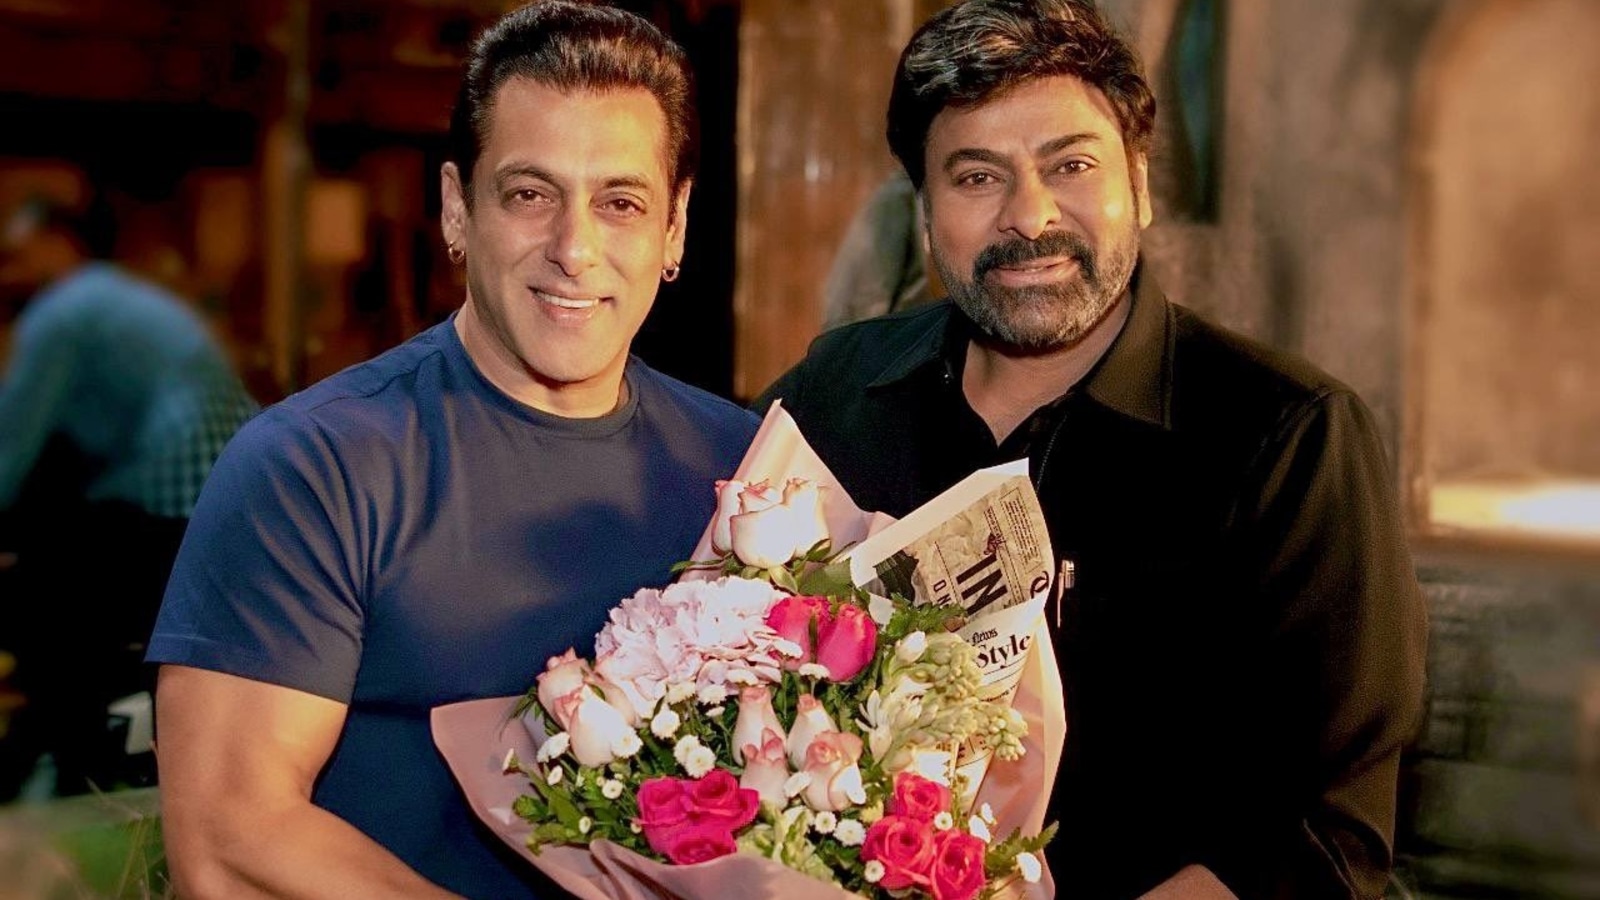 Chiranjeevi welcomes Salman Khan on board Godfather with flowers. See pic - Hindustan Times